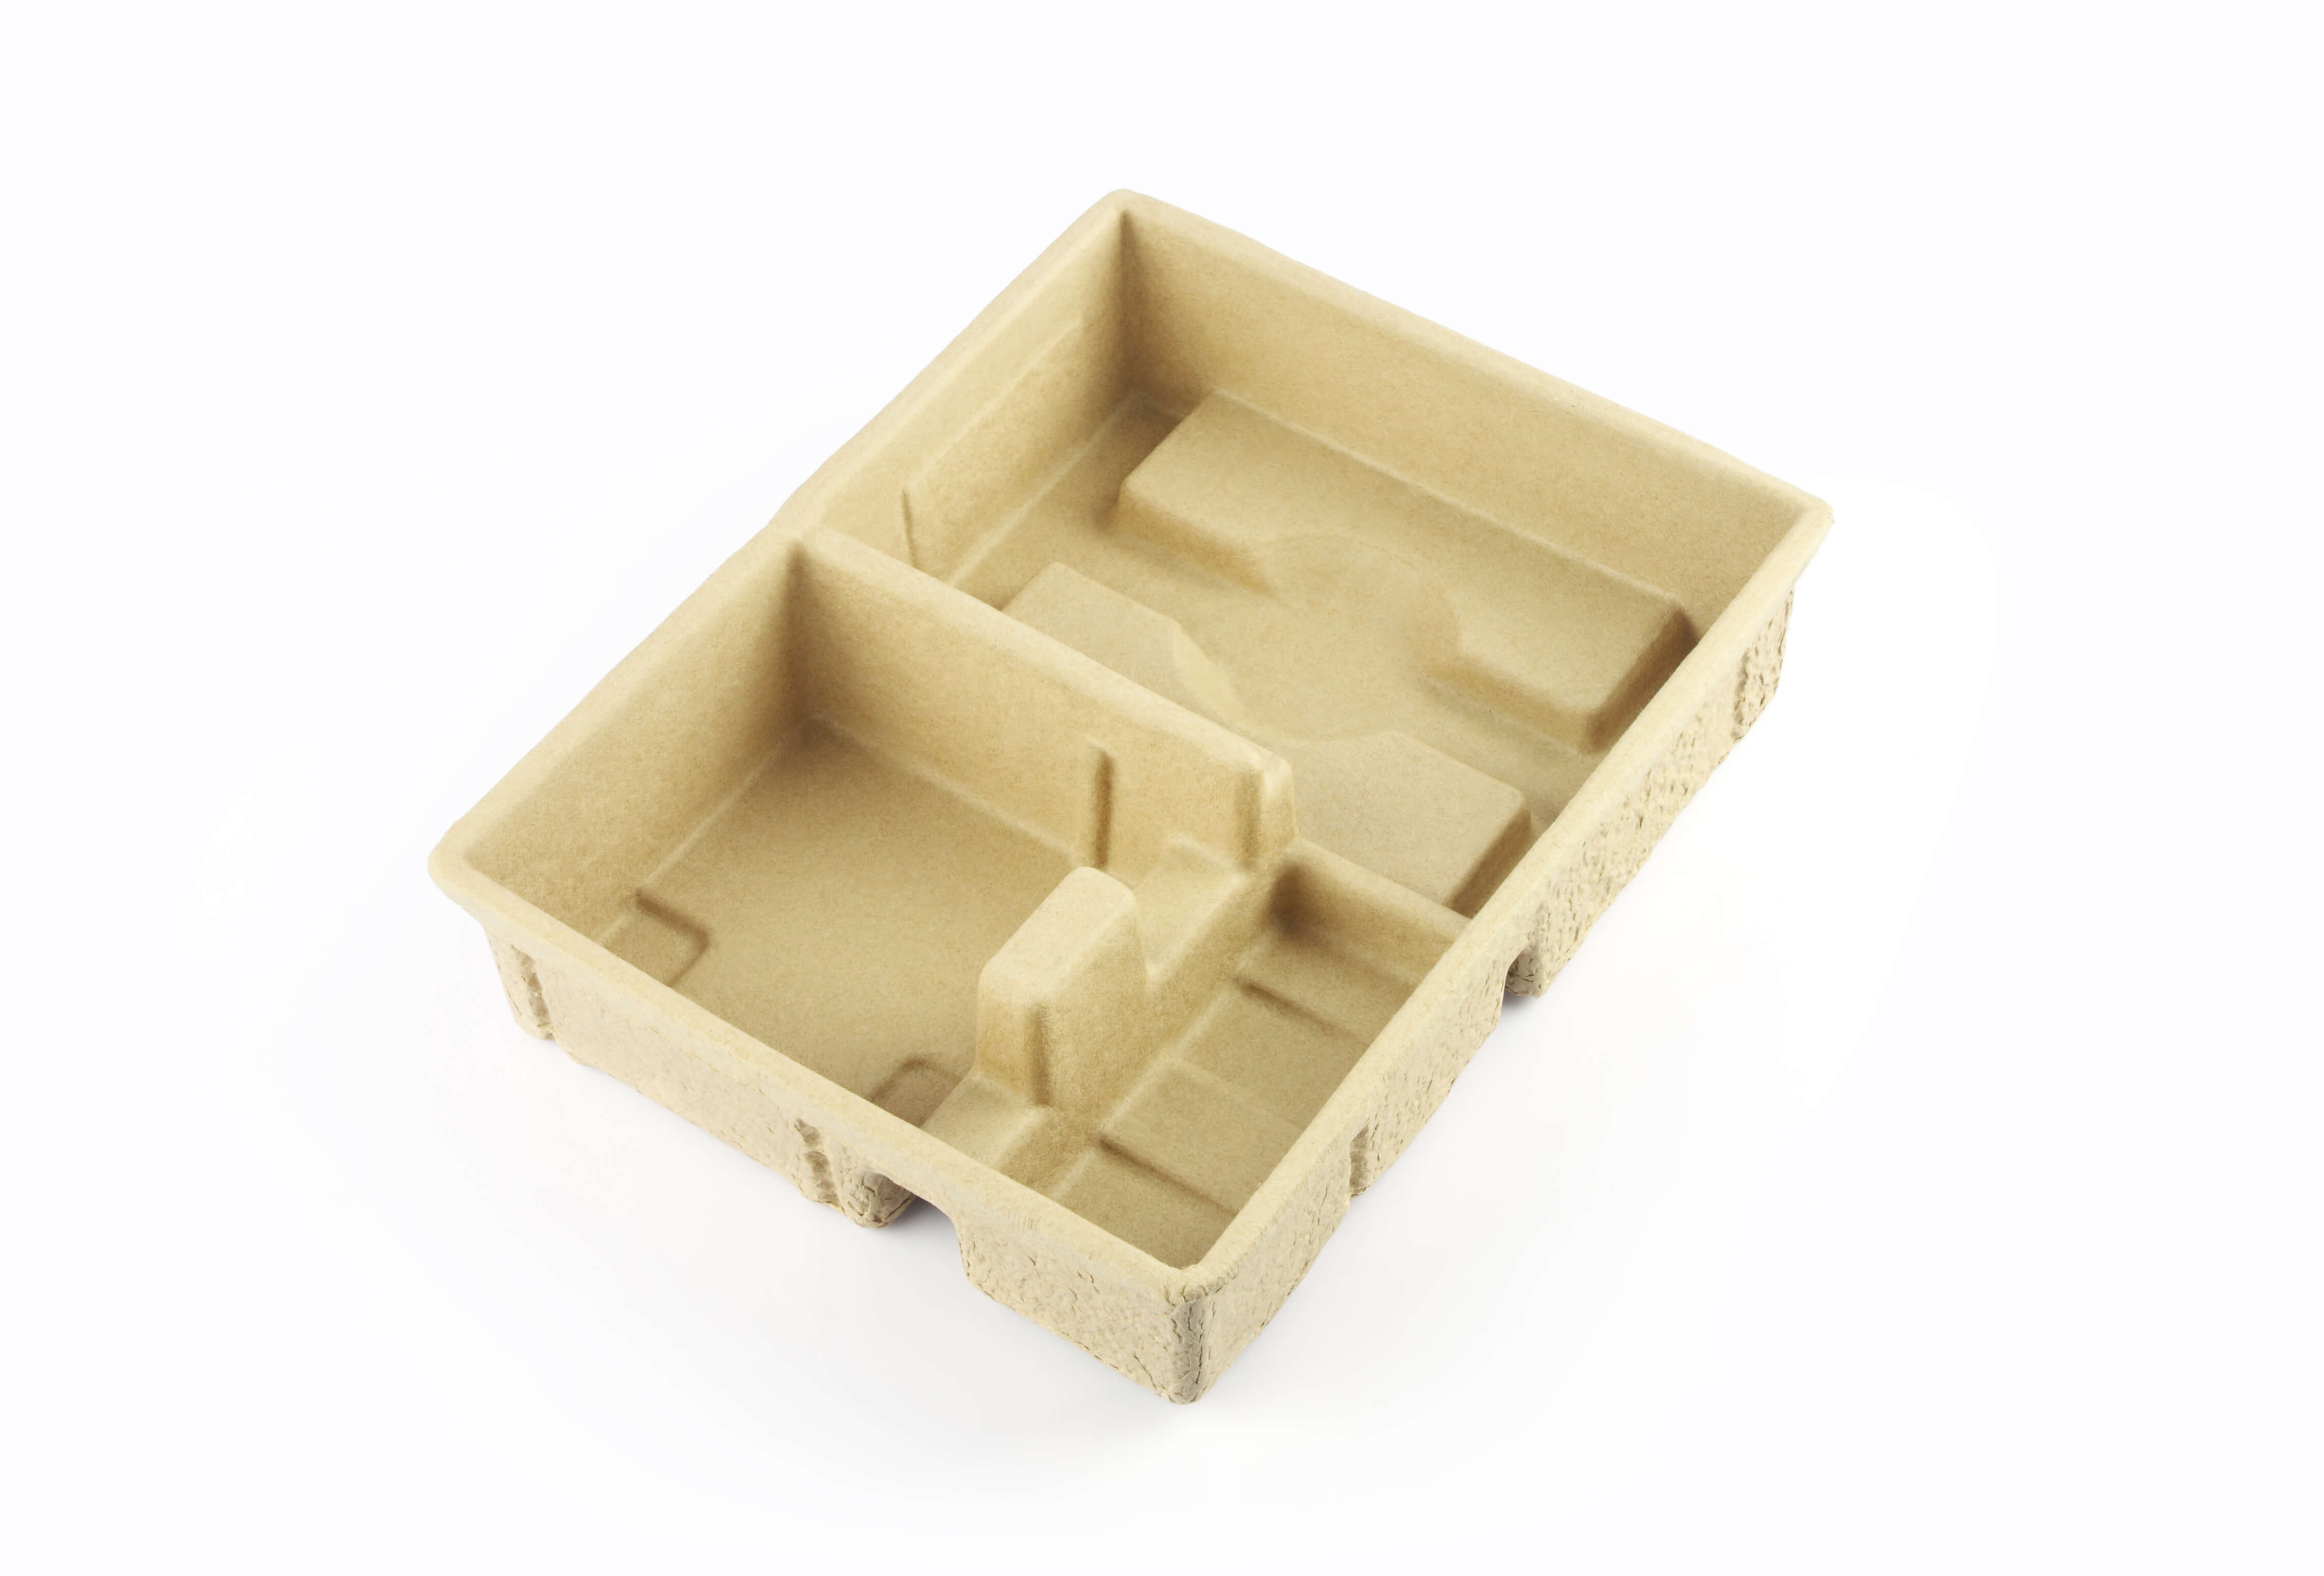 Packaging Trends including luxury molded fiber packaging for biodegradable packaging